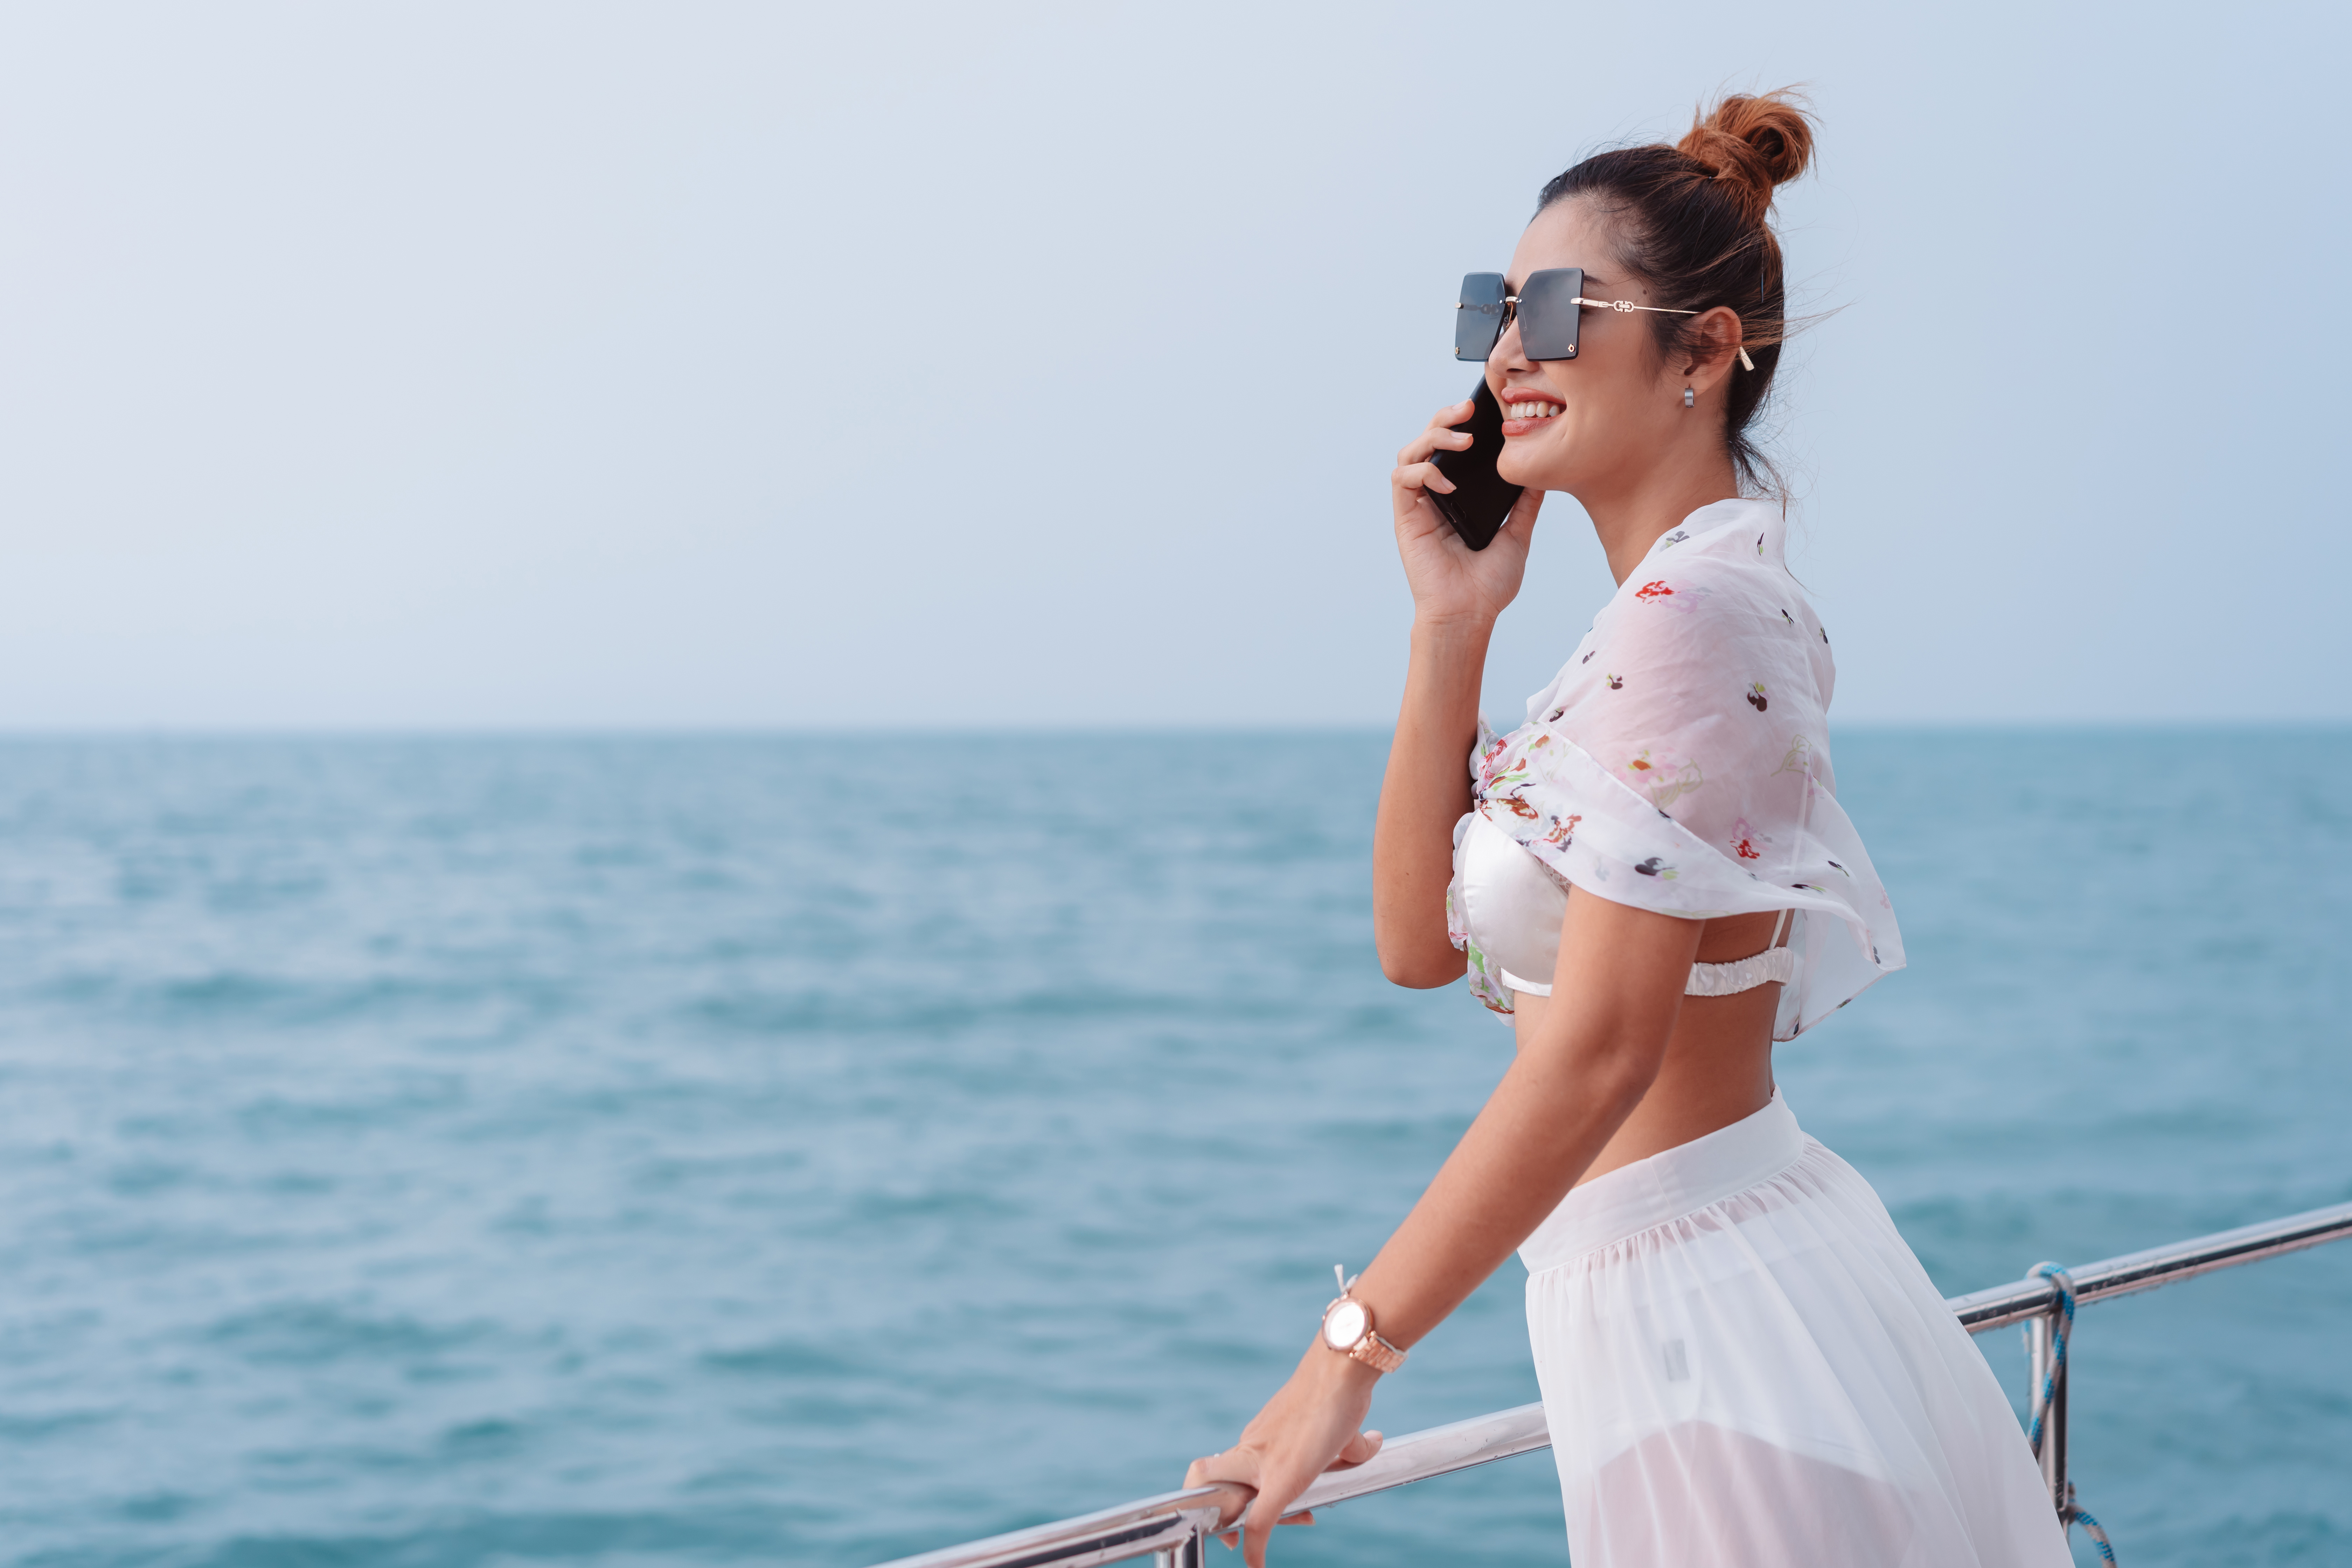 Cellular at Sea is key for cruisers wanting to stay in touch with family, friends, work.